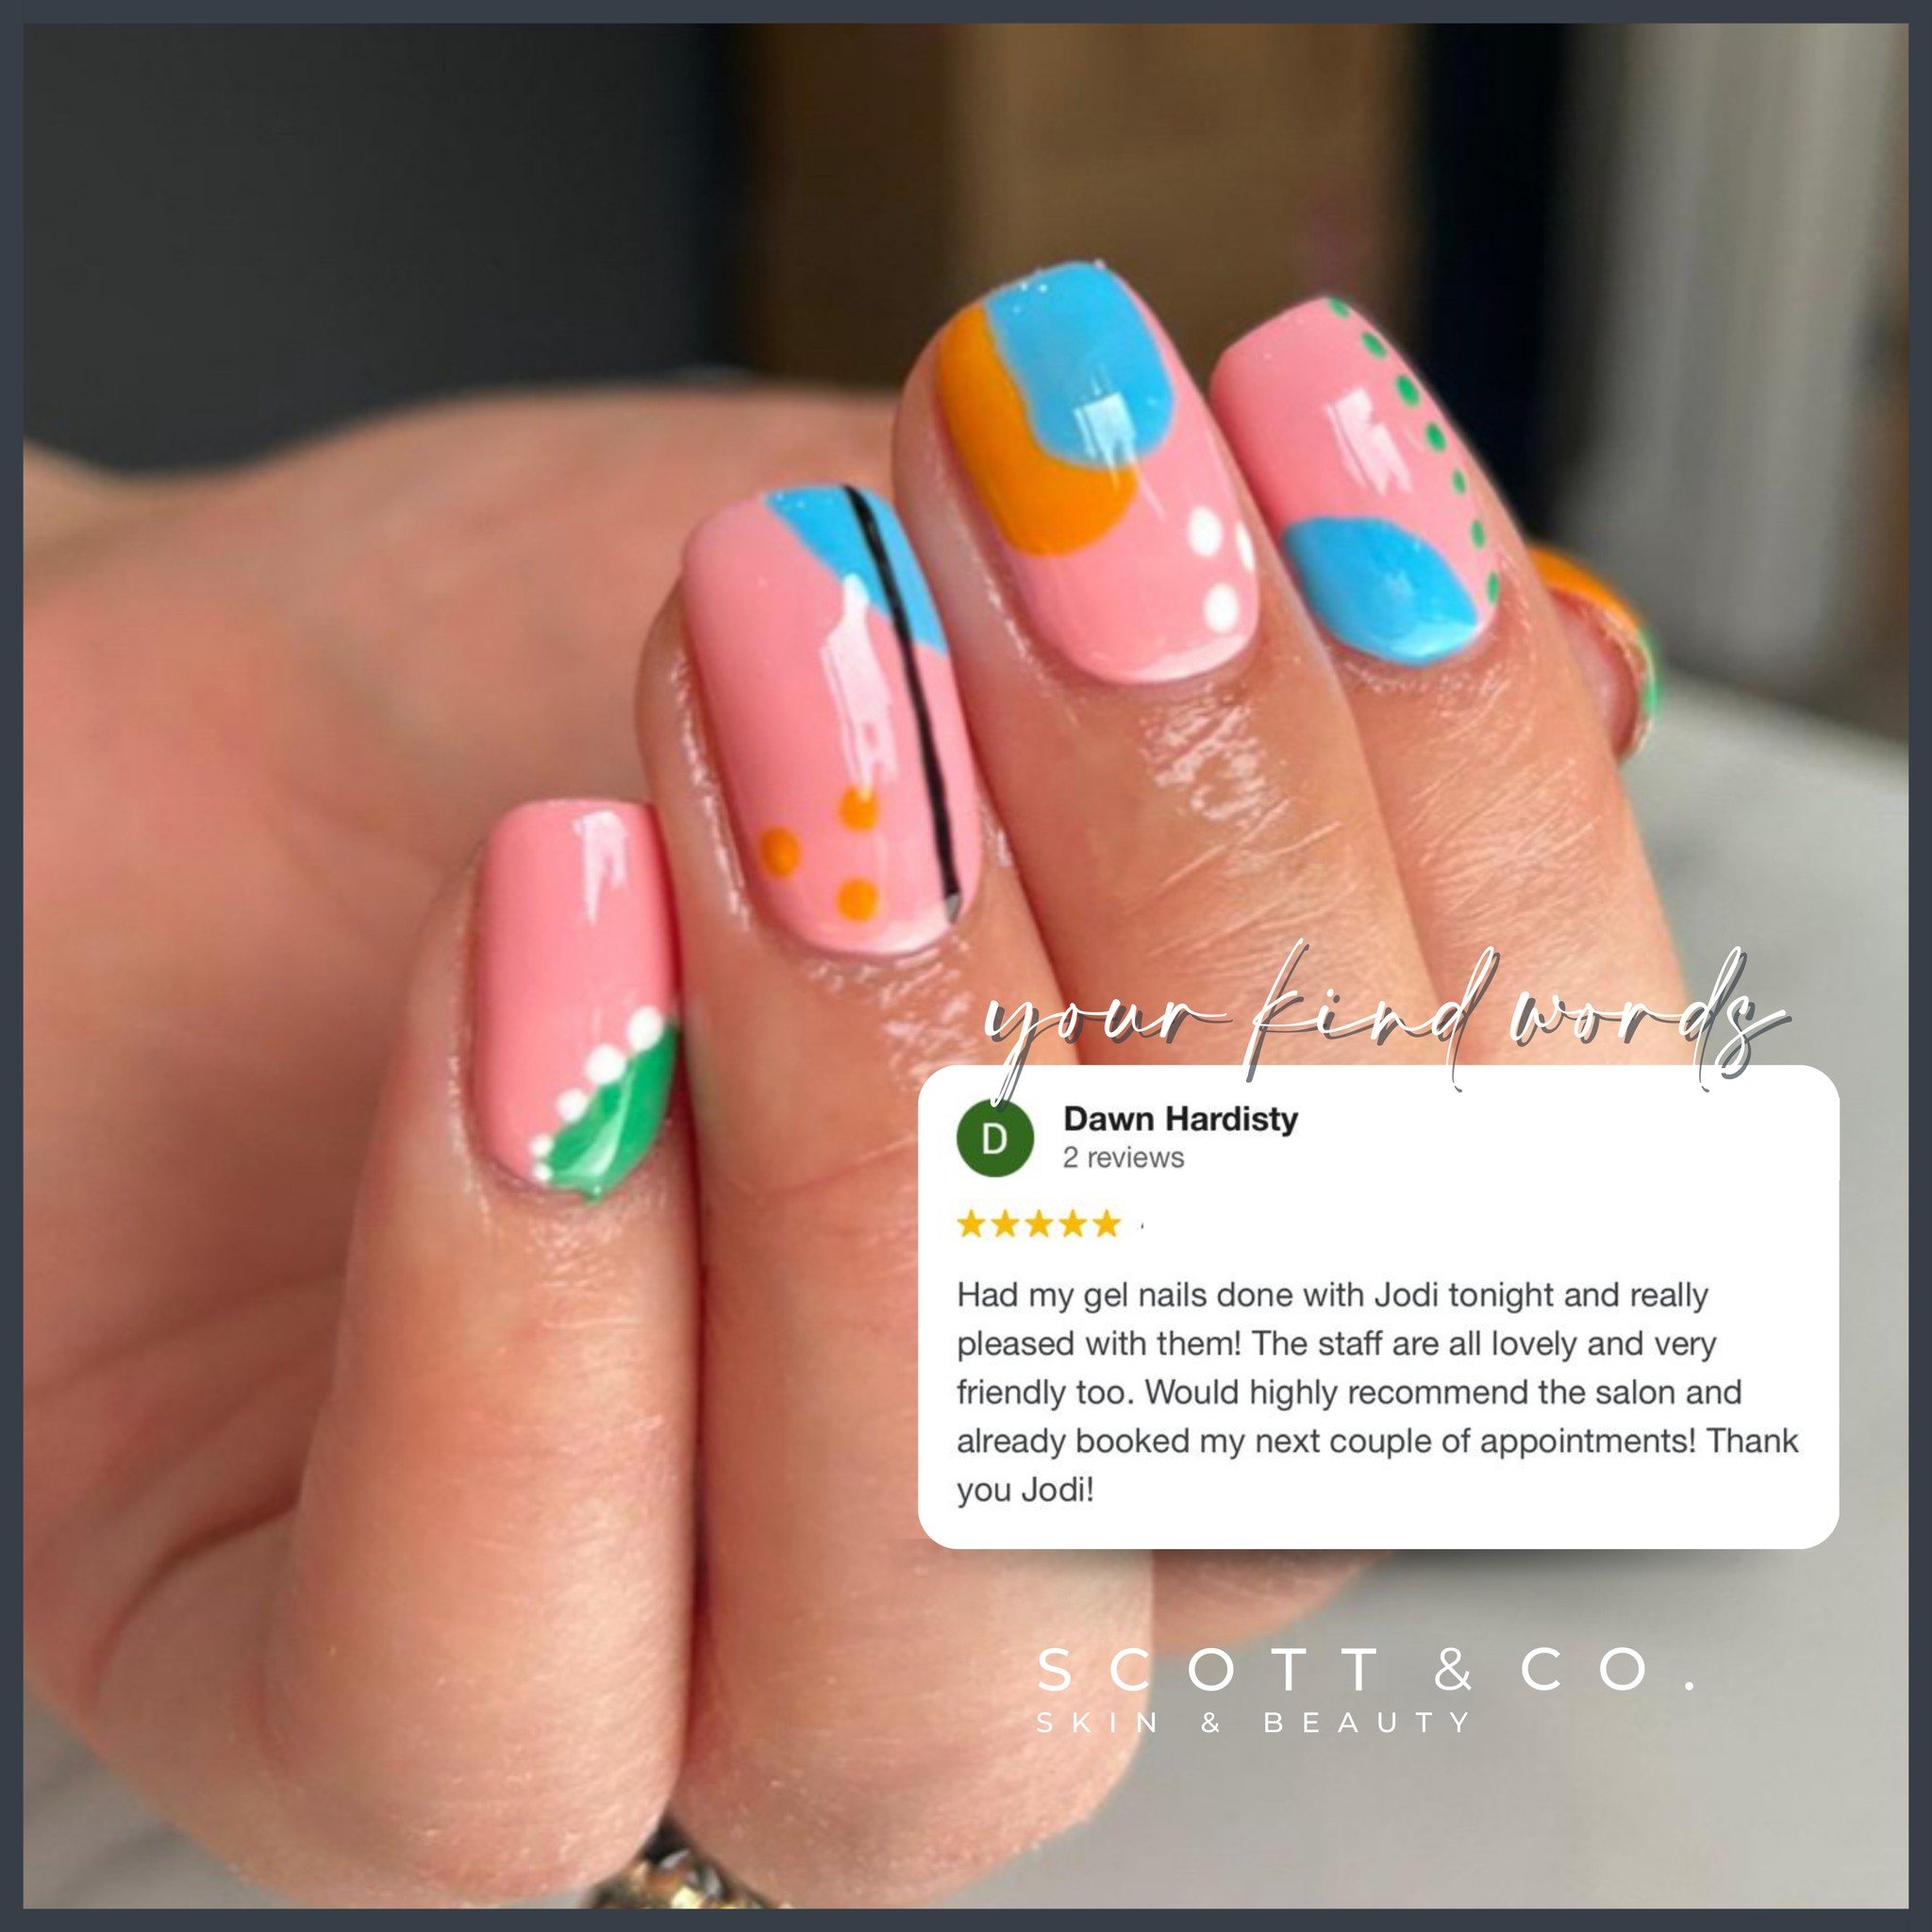 Gorgeous set by Jodi 😍🌸🩵🍊

@jodi_scottandcoskinandbeauty 

This set was a Gel Overlay with Hand Painted Nail Art - &pound;38.00 💅🏼

Want a colourful set for an upcoming holiday? We'd love to get creative for you 🎨

-

#gelnails #gelnailsart #c